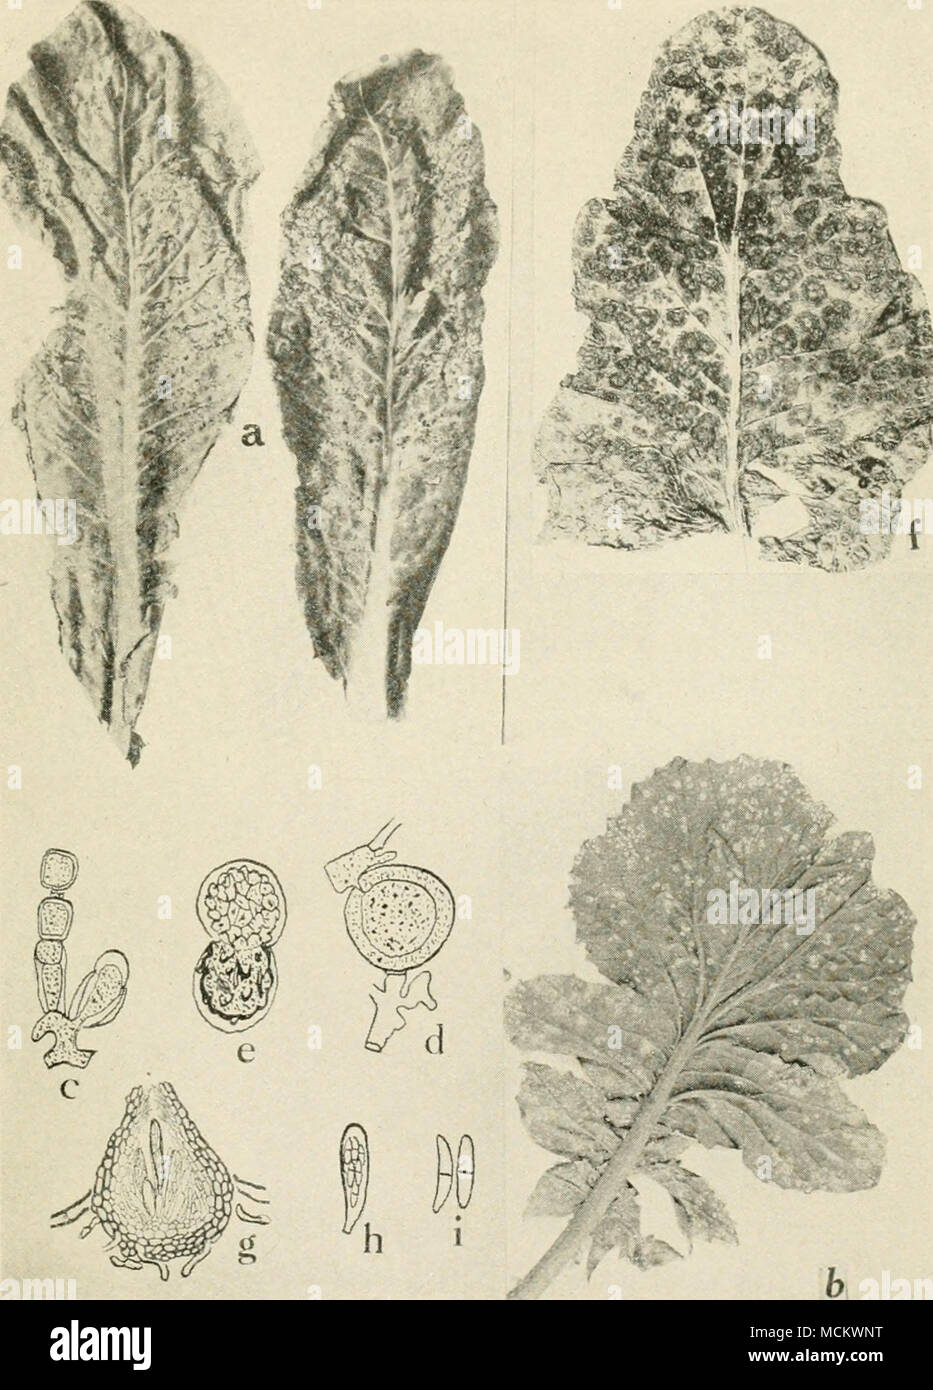 . Fig. 33. Diseases of the Cauliflower axd Radish. a. Spot disease of cauliflower (after McCuIloch), b. white rust of radish, c. conidio- phore of the white rust fungus, Cyslopus candidus, d. fertilization in Albugo Candida, e. germination of the oospore of Albugo Candida, f. ring spot on cauliflower head, g! perithecium of Mycospho'reUa brassicicola, h. ascus of Mycospha-rella brassicicola, i. ascospores of Mycosphcerella brassicicola {g. to i. after Osmun and Anderson). Stock Photo